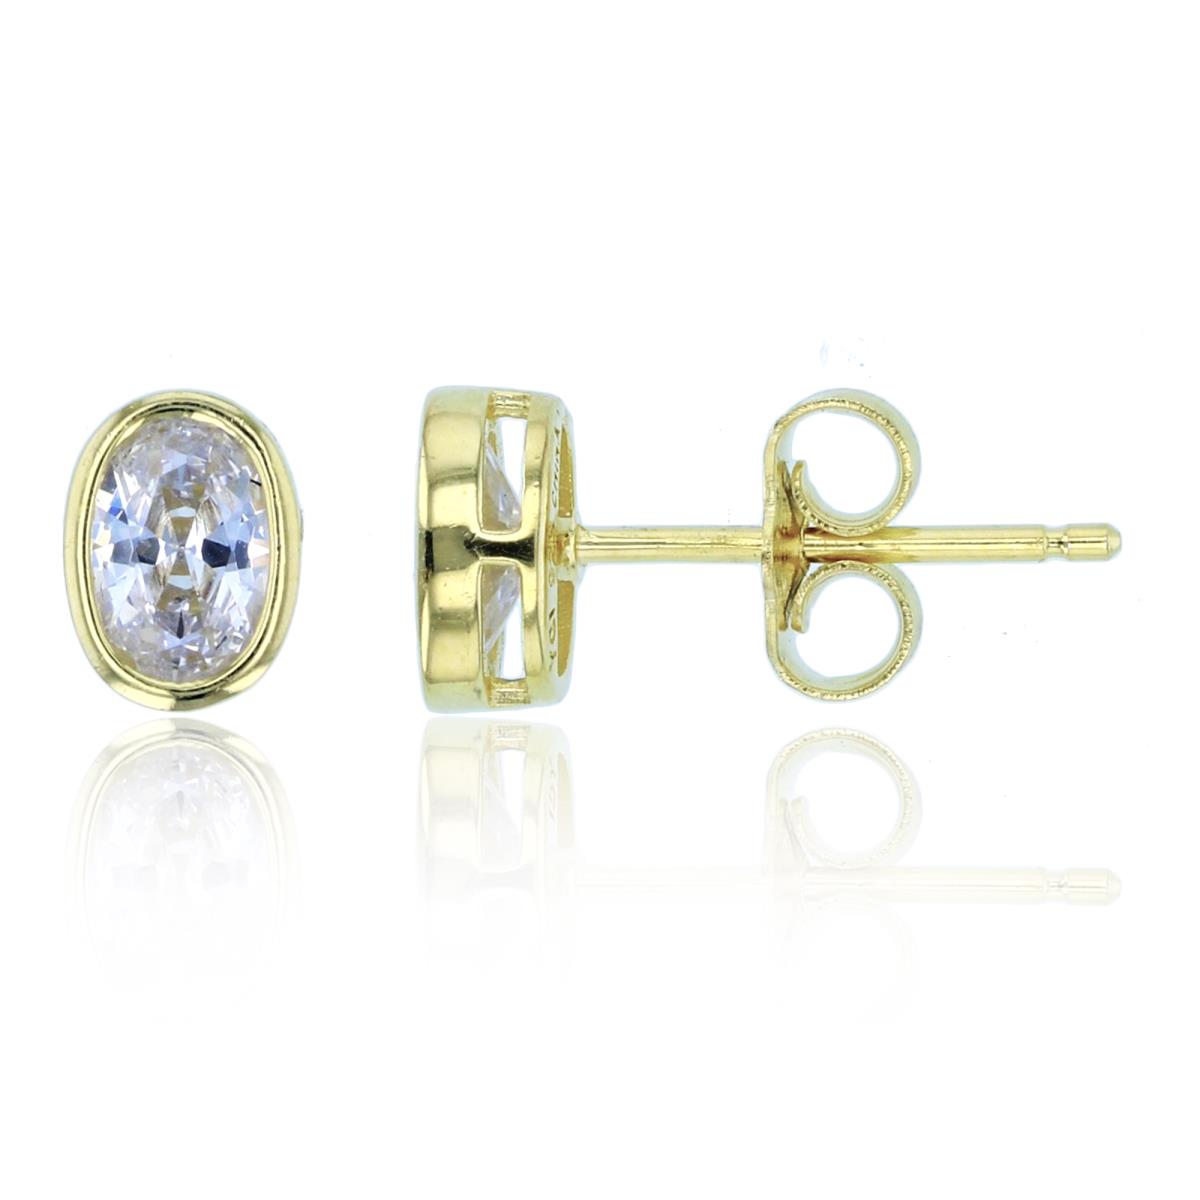 Sterling Silver+1Micron Yellow Gold 6x4mm Oval CZ Bezel Studs